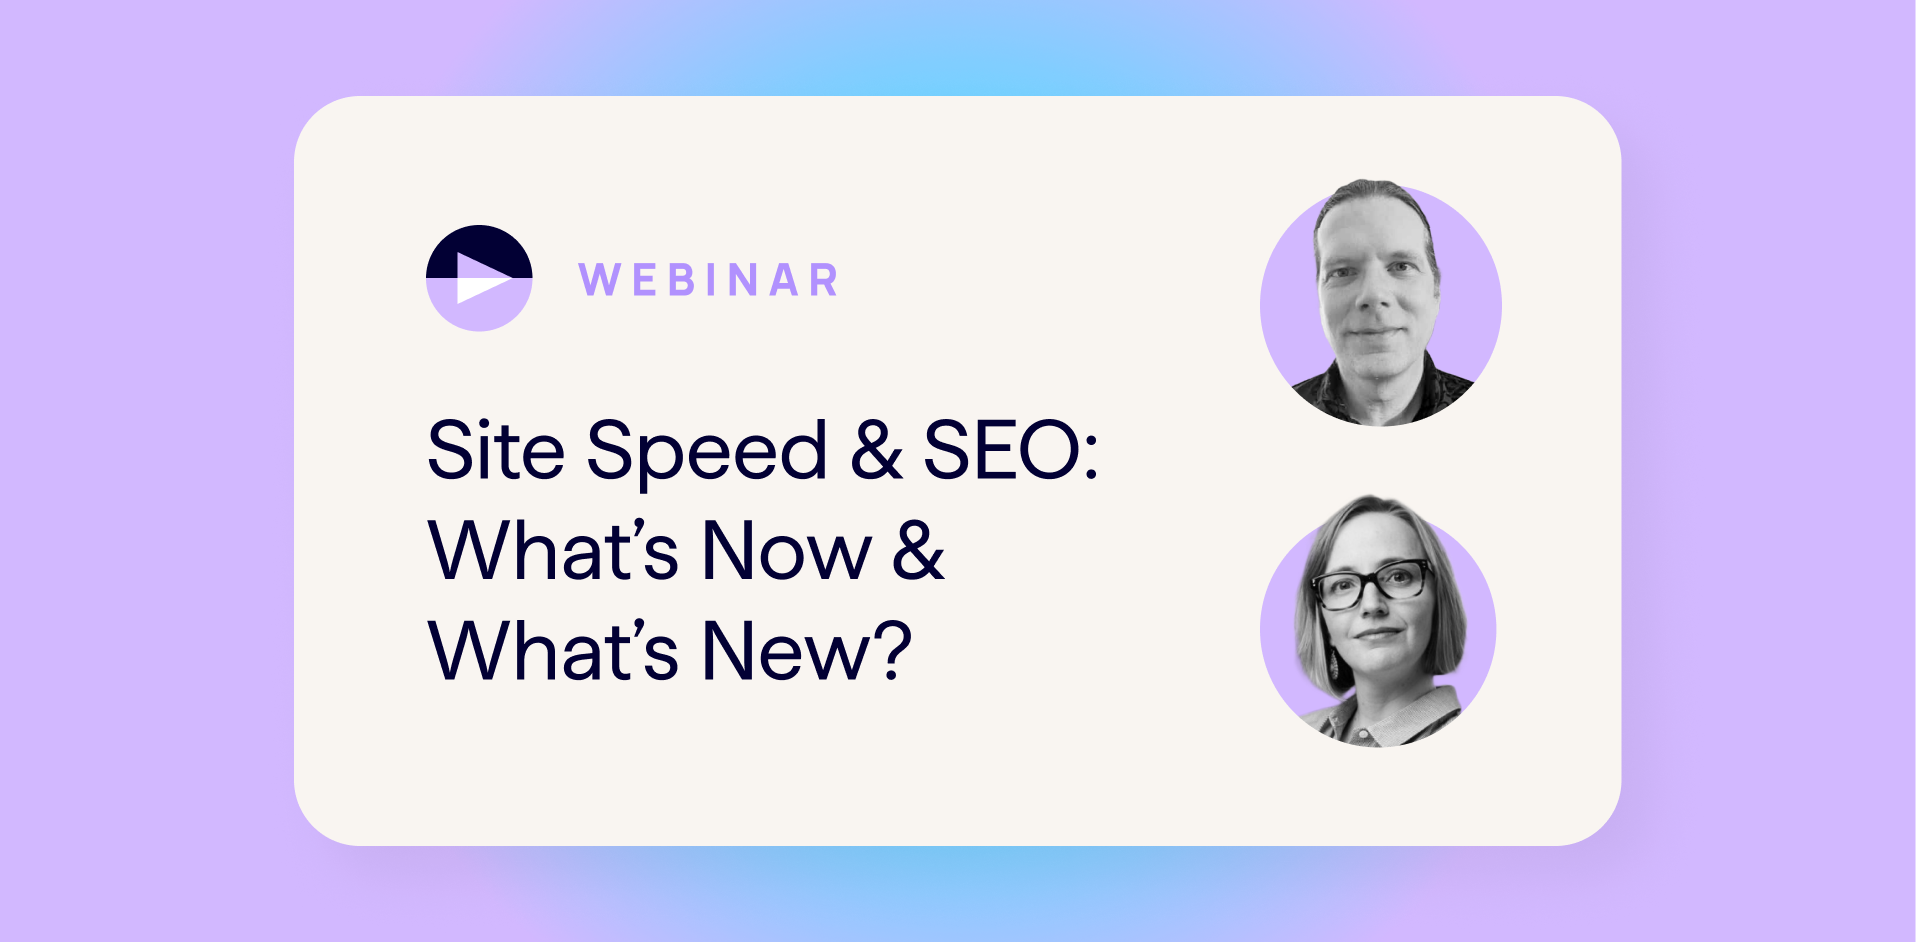 Thumbnail_Webinar_Site Speed & SEO with Anne Berlin and Dave Smart